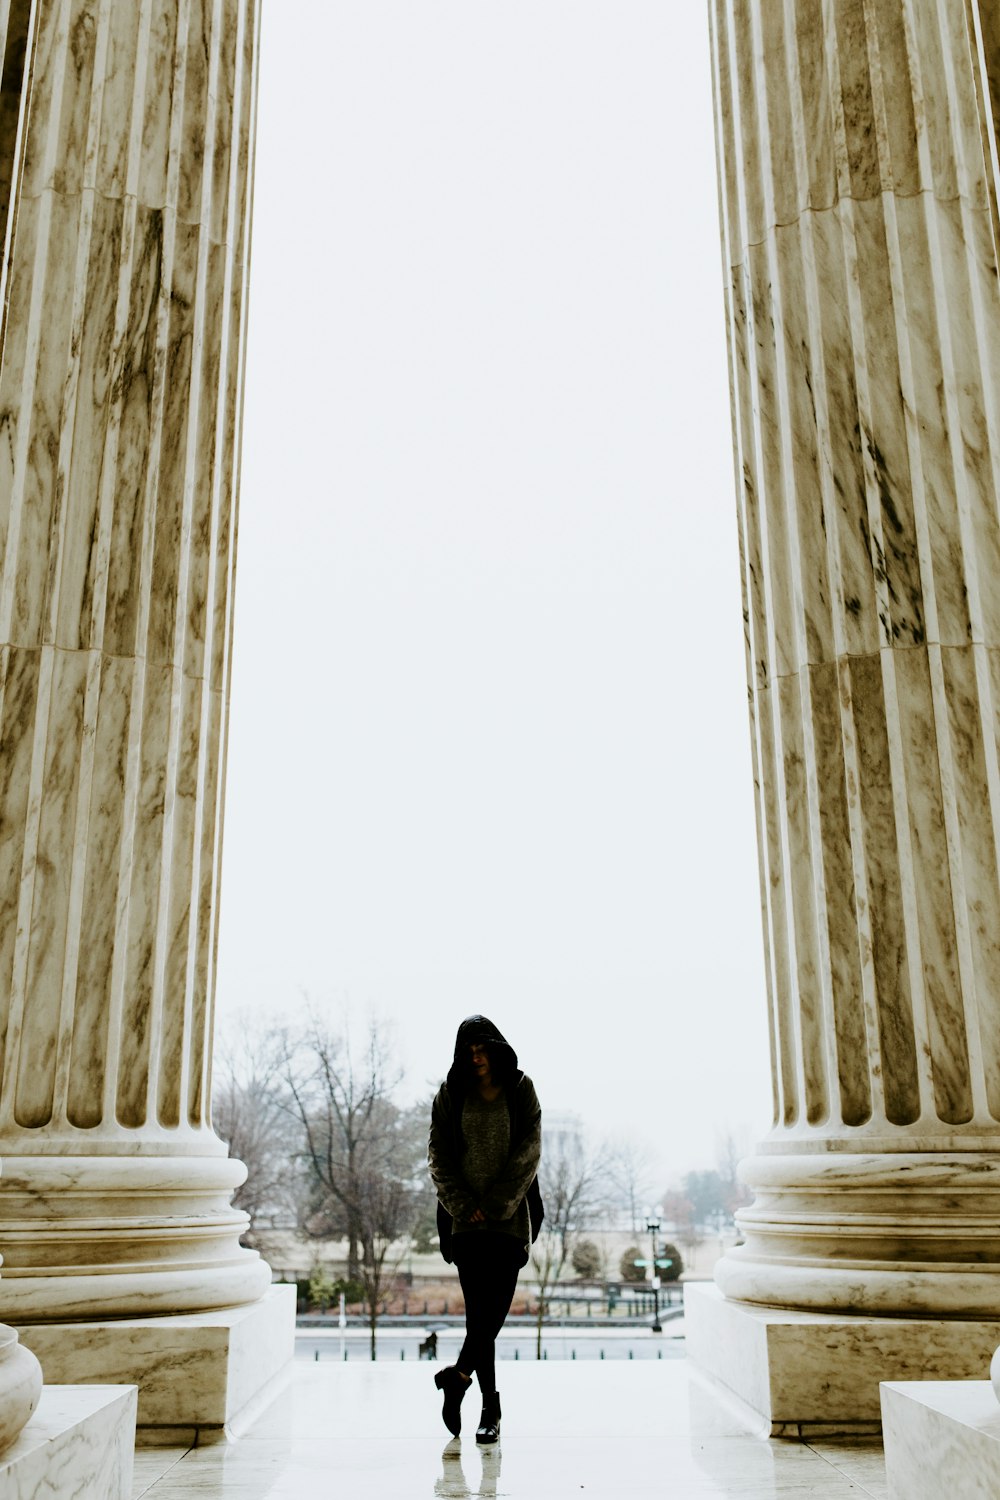 a person walking in front of two large pillars